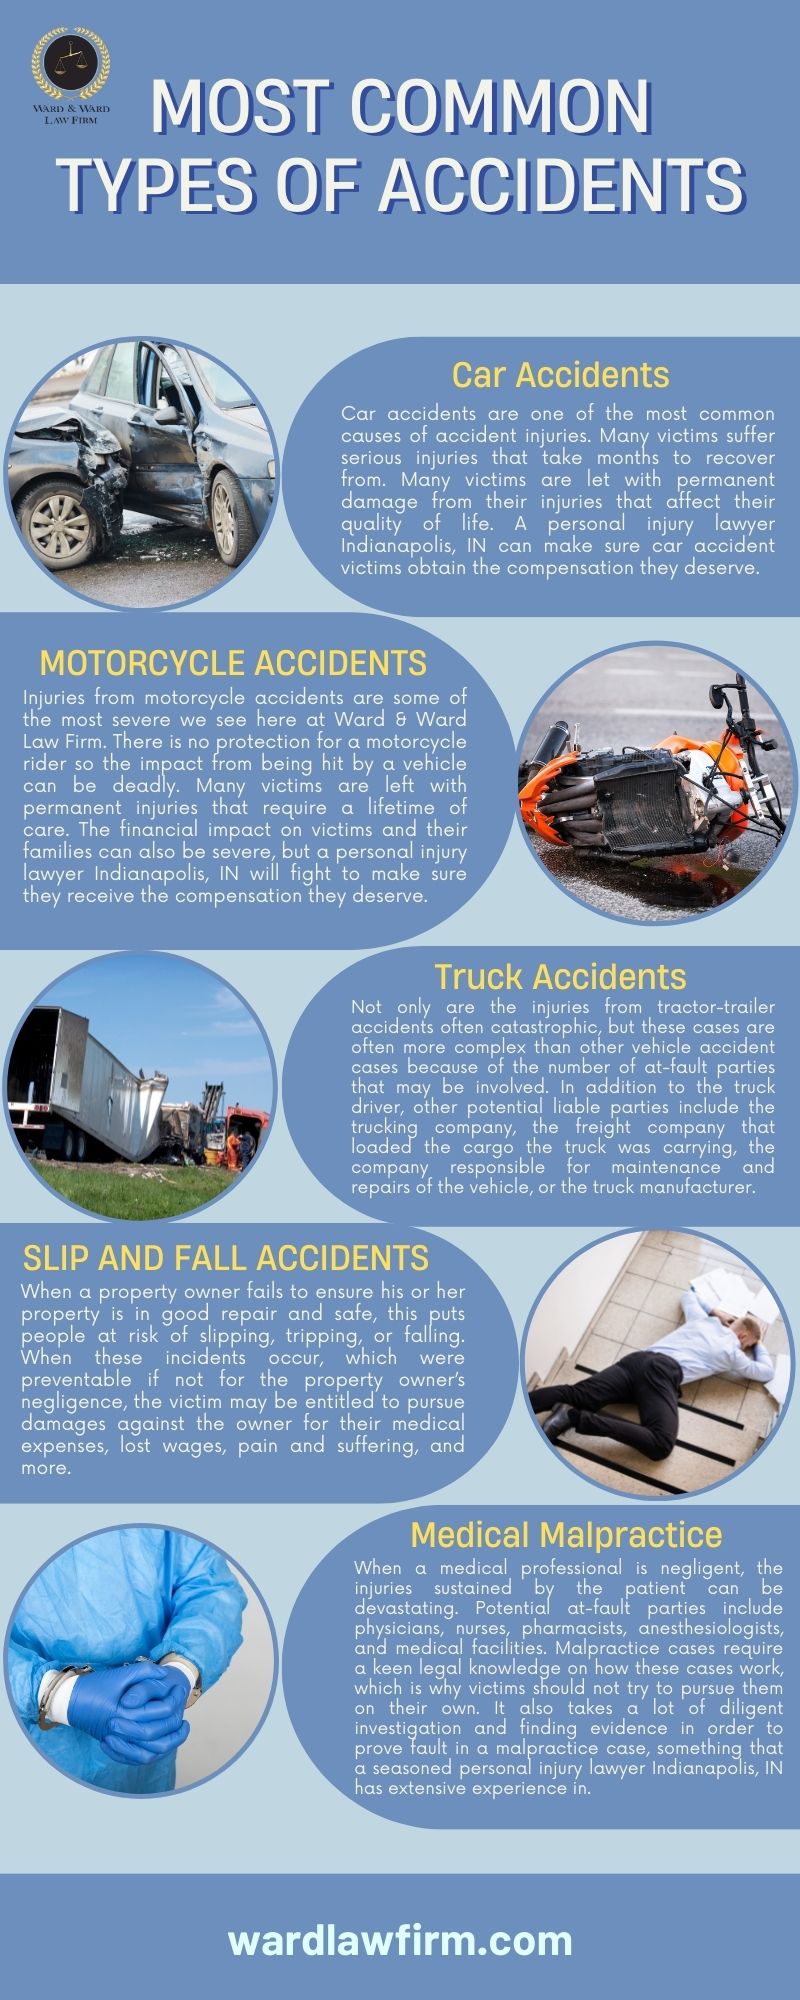 Most Common Types of Accidents Infographic